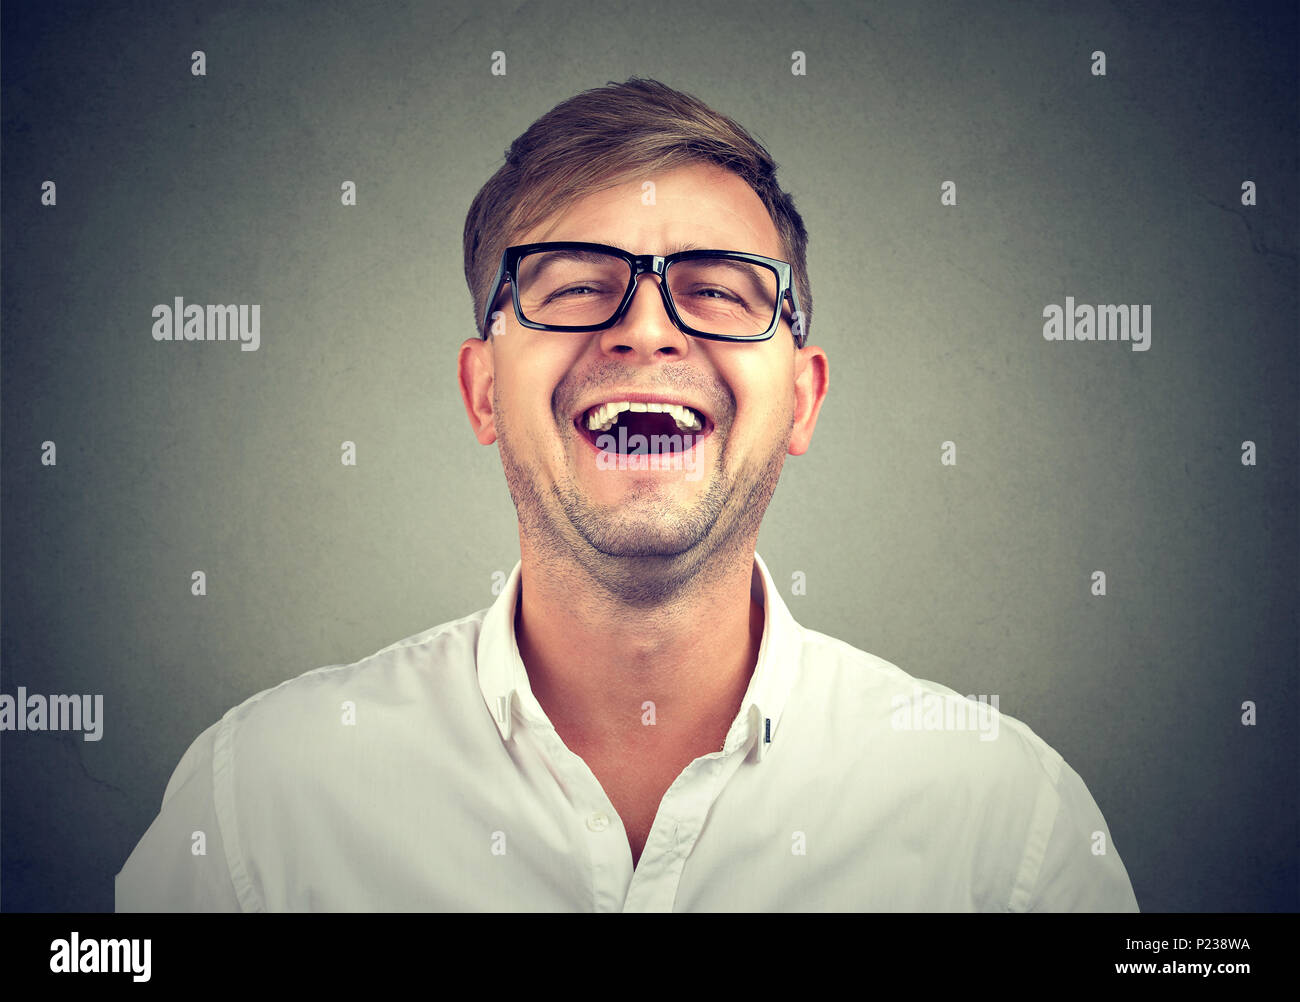 Causal young man in white shirt and black glasses laughing from humorous joke. Stock Photo